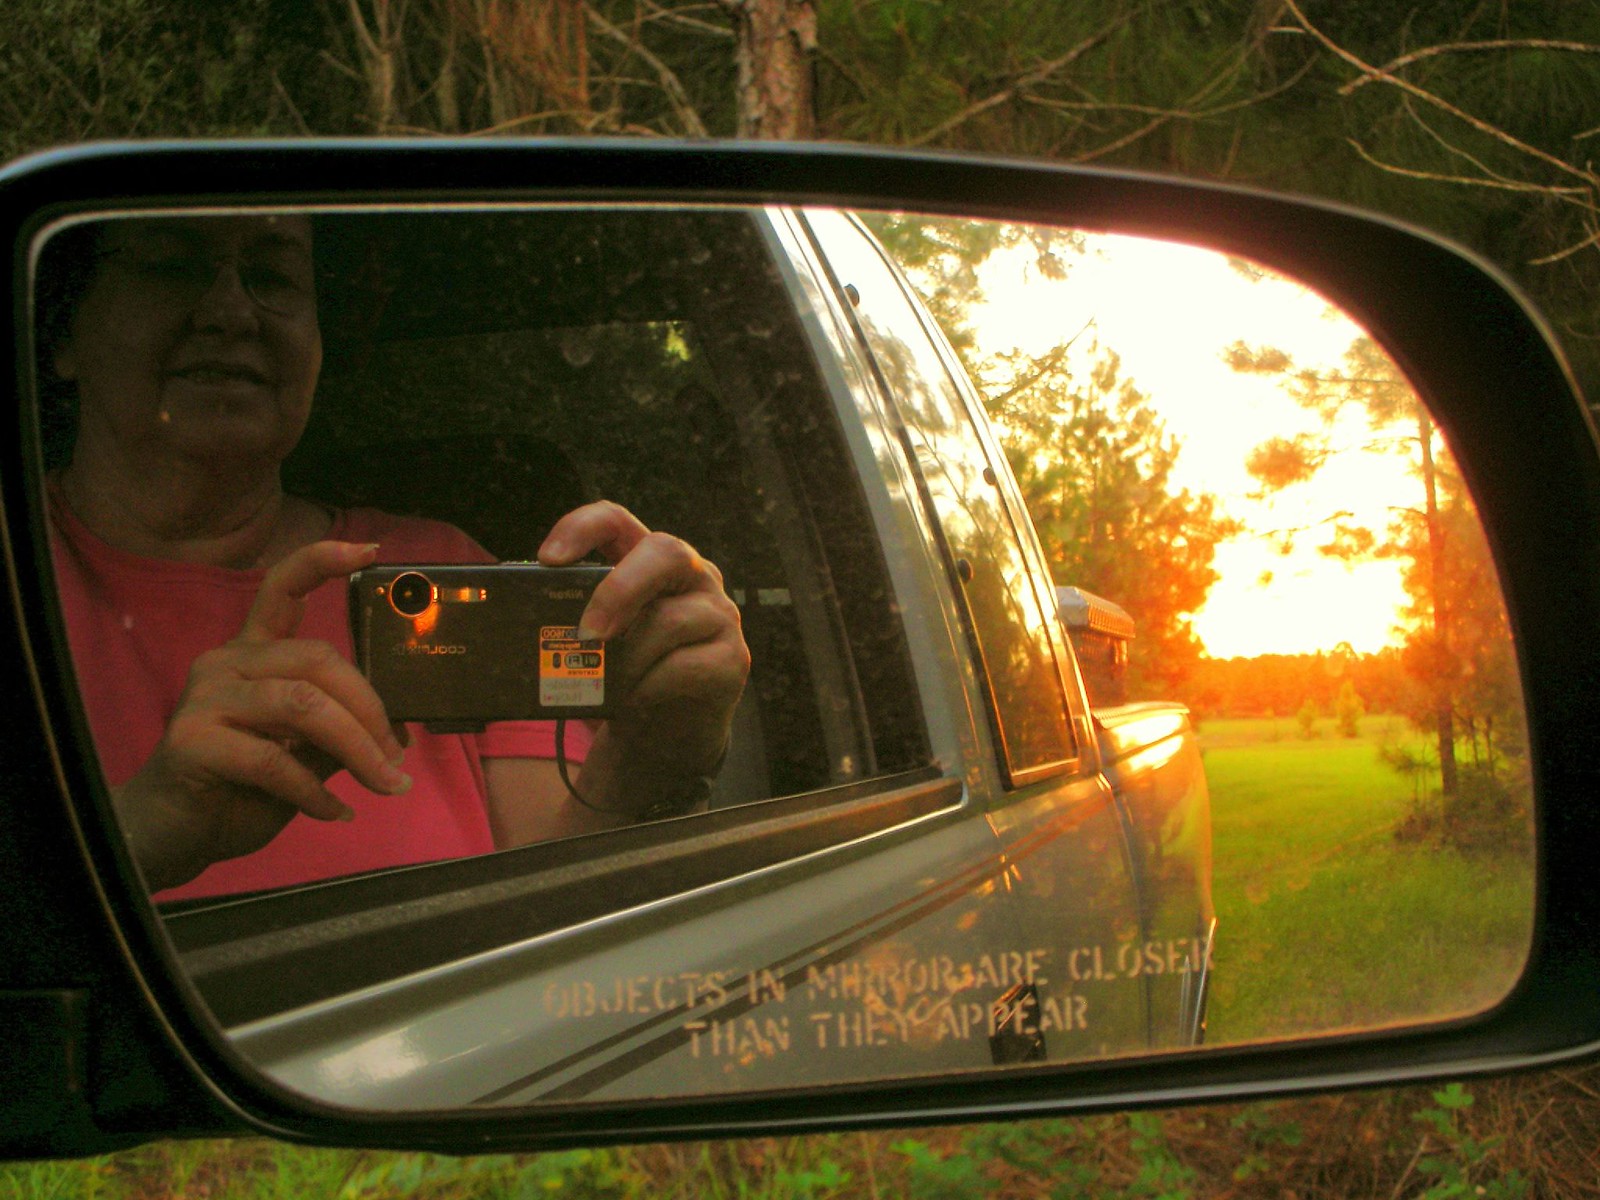 Day 280B: Sunset Mirror Reflection on 9-8-07 in South Georgia, USA